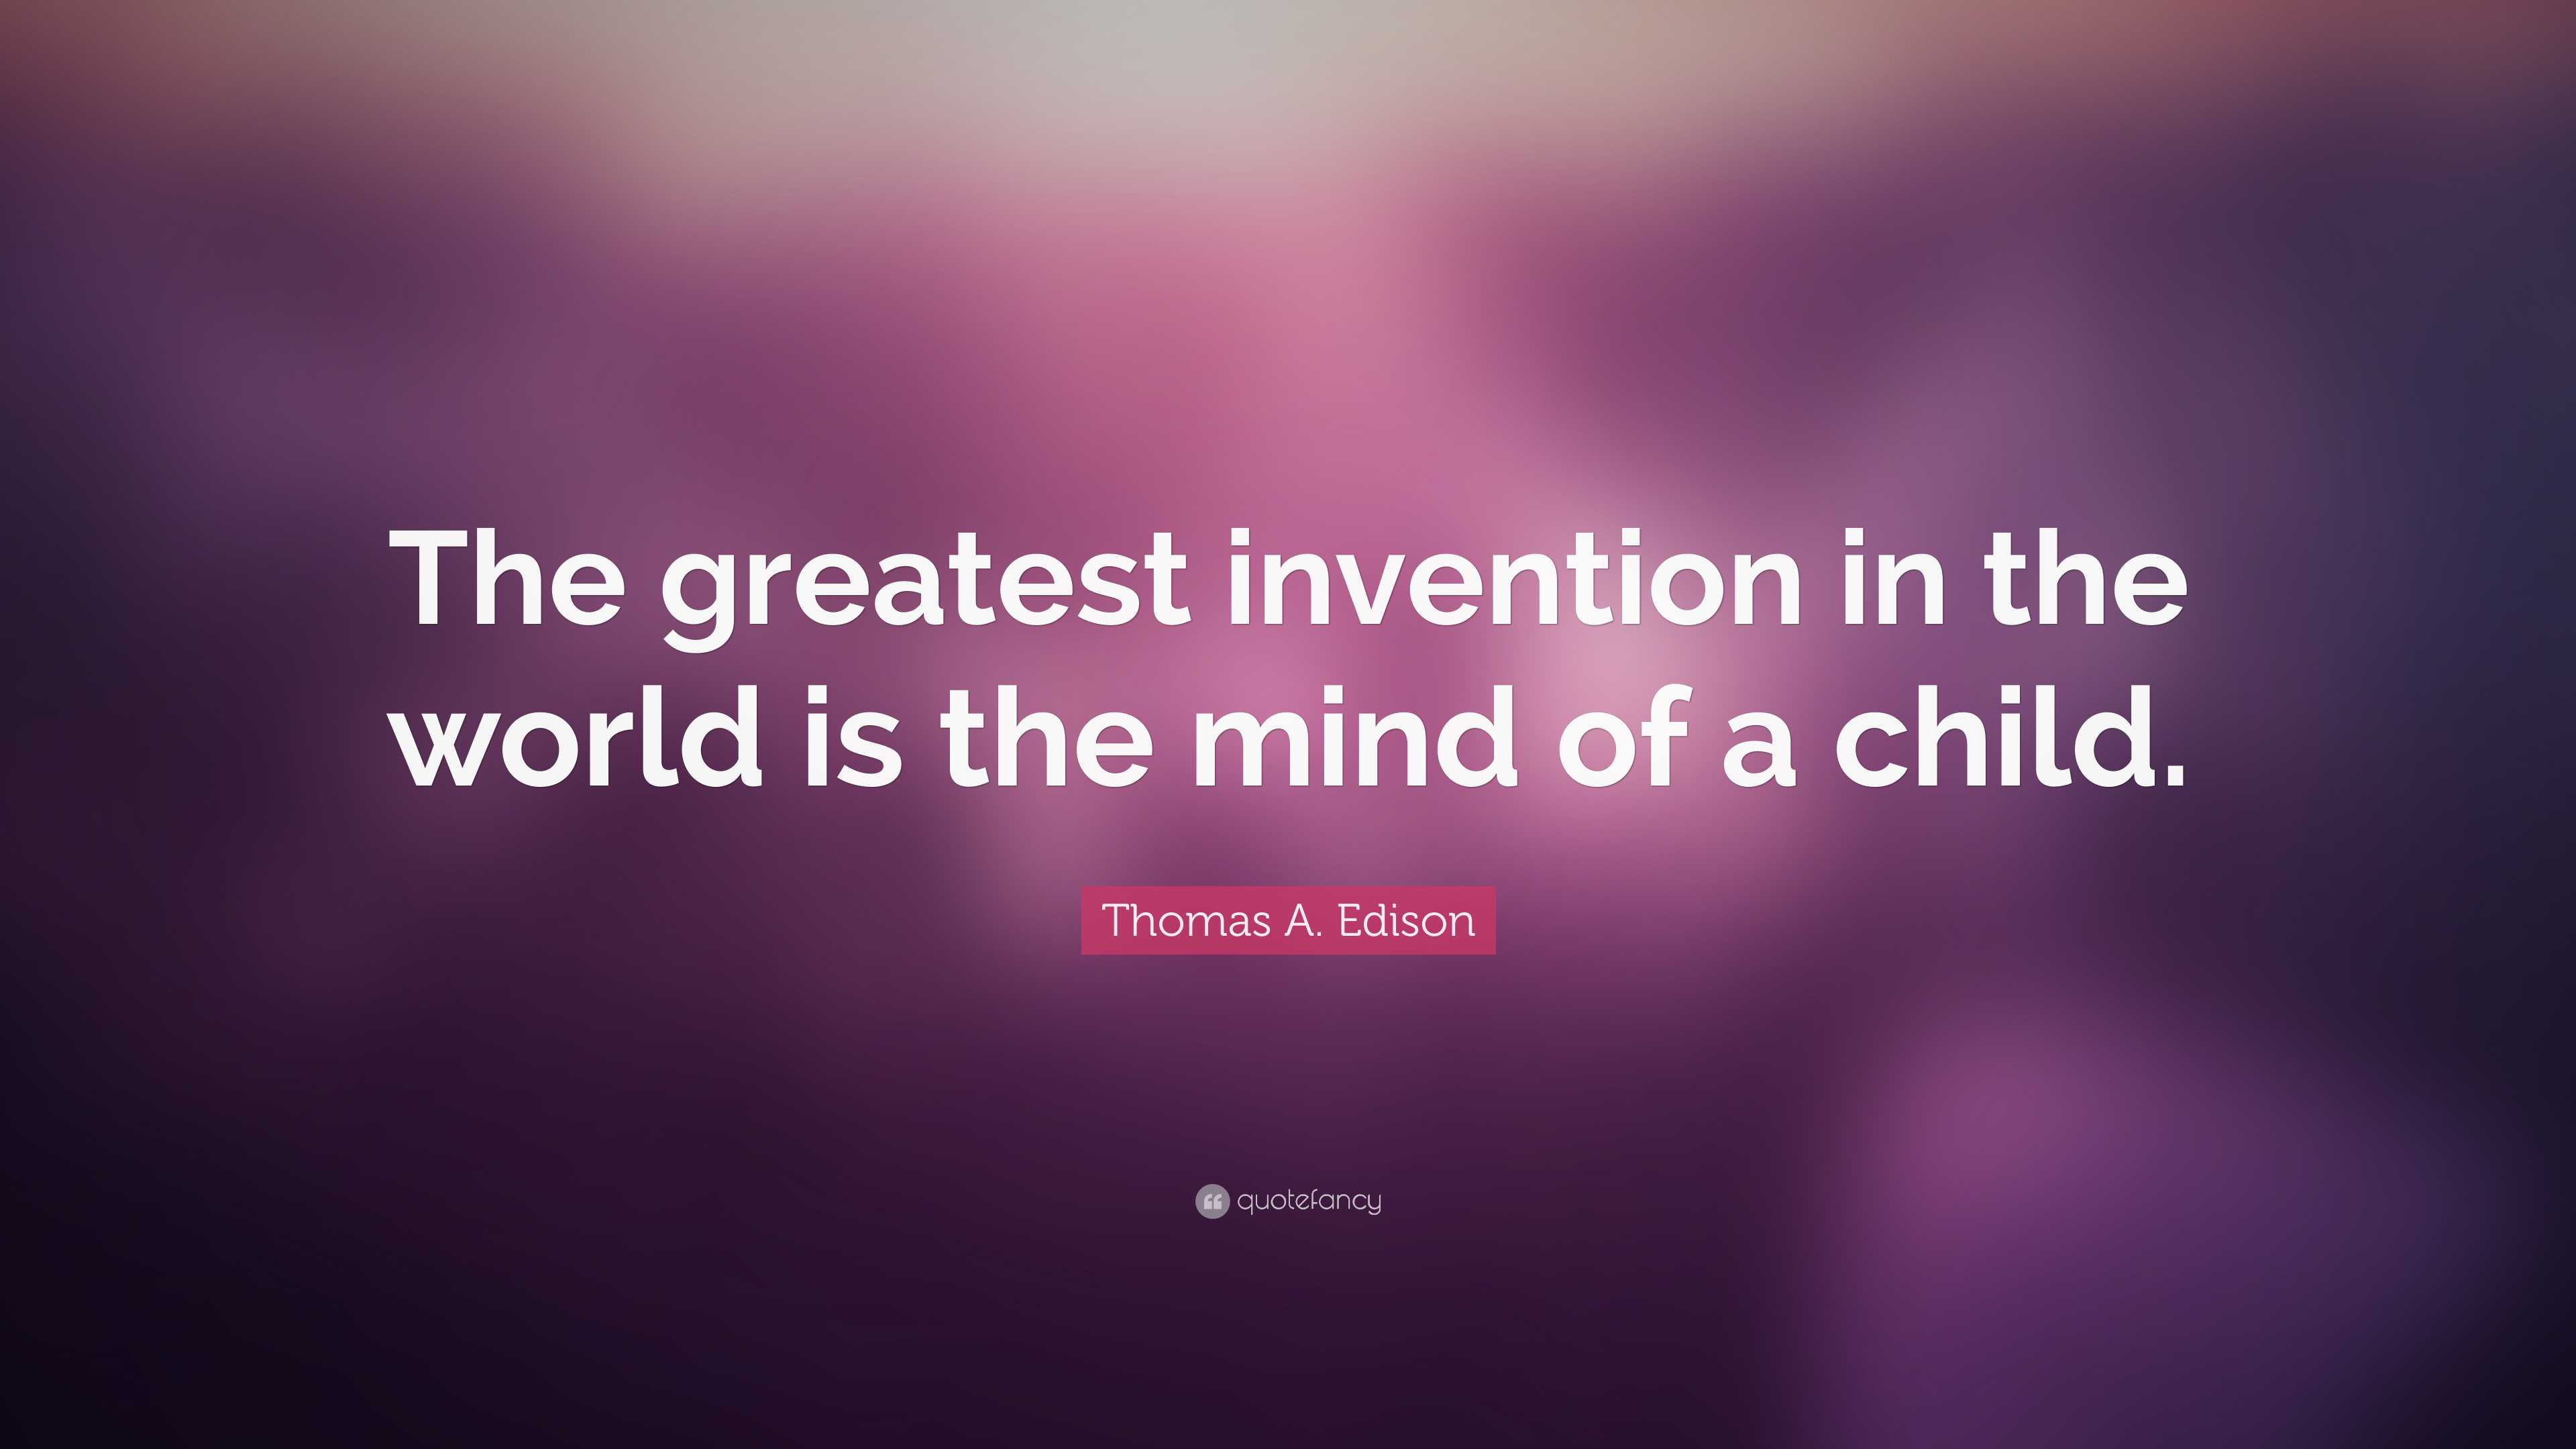 Custom Designs The Greatest Invention In The World Is The Mind Of A Child  Thomas Edison Quote 5x24 Inches